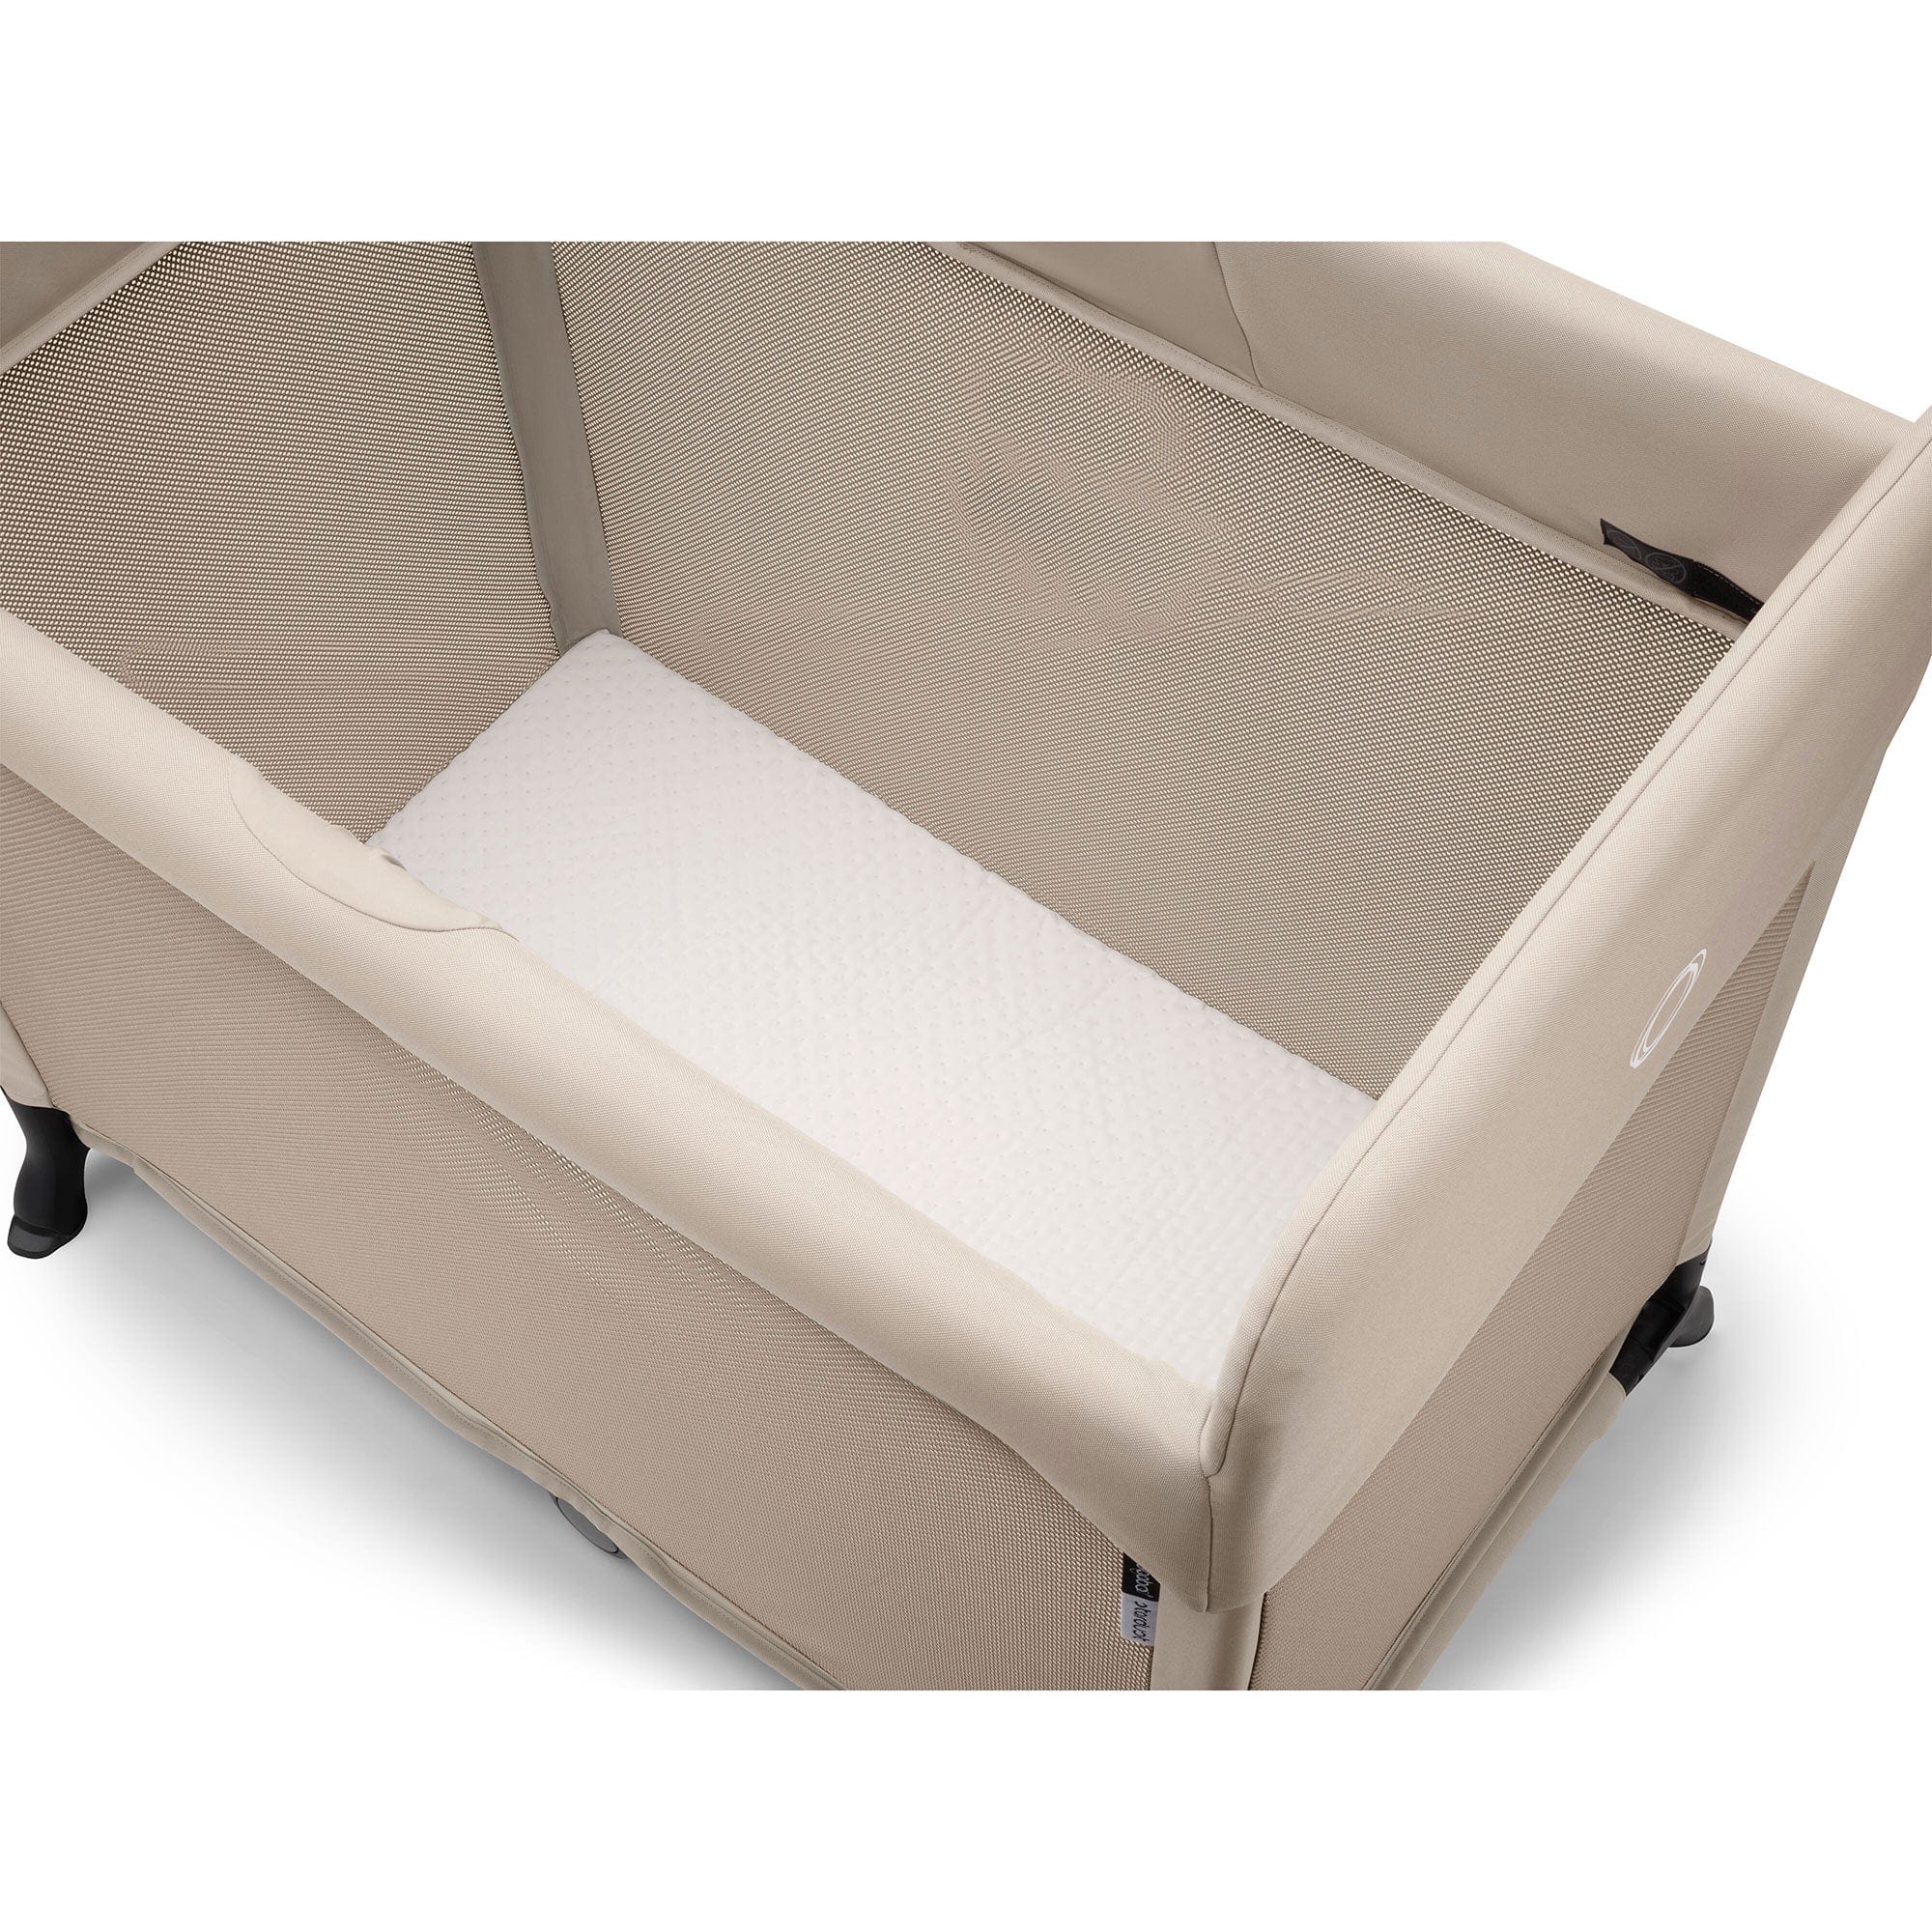 Bugaboo Stardust Travel Cot in Taupe Travel Cots 900005003 8715688085028